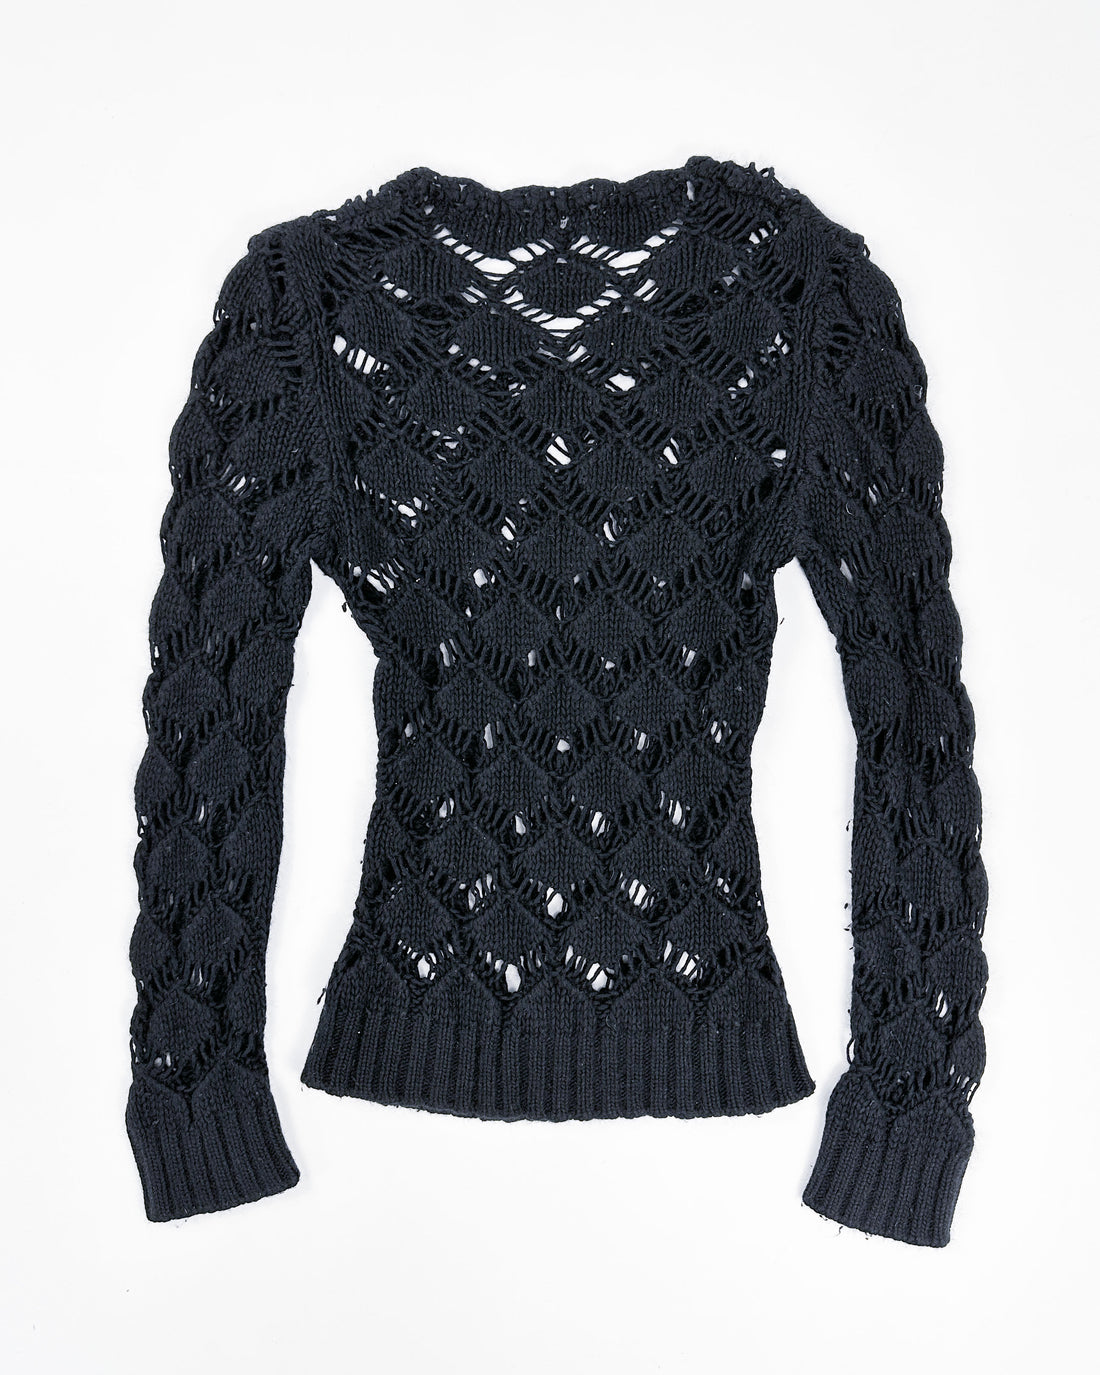 Dolce & Gabbana Black Wool Perforated Knit 2000's